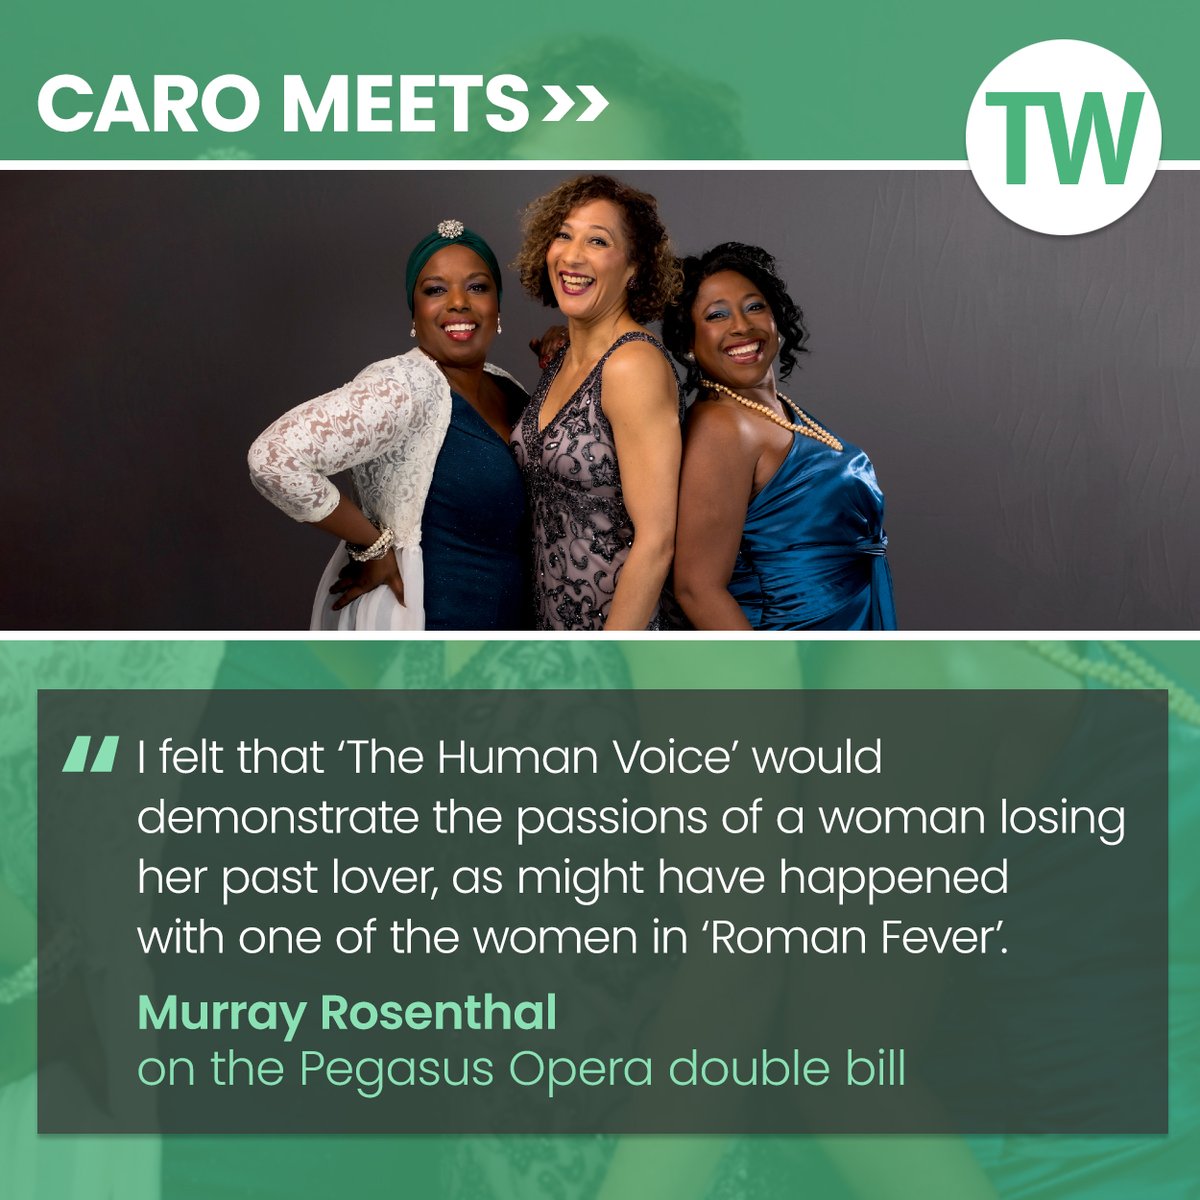 This week Caro Meets Philip Hagemann and Murray Rosenthal to discuss Pegasus Opera’s latest double bill of ‘Roman Fever’ and ‘The Human Voice’: bit.ly/4at5jjJ @PegasusOpera